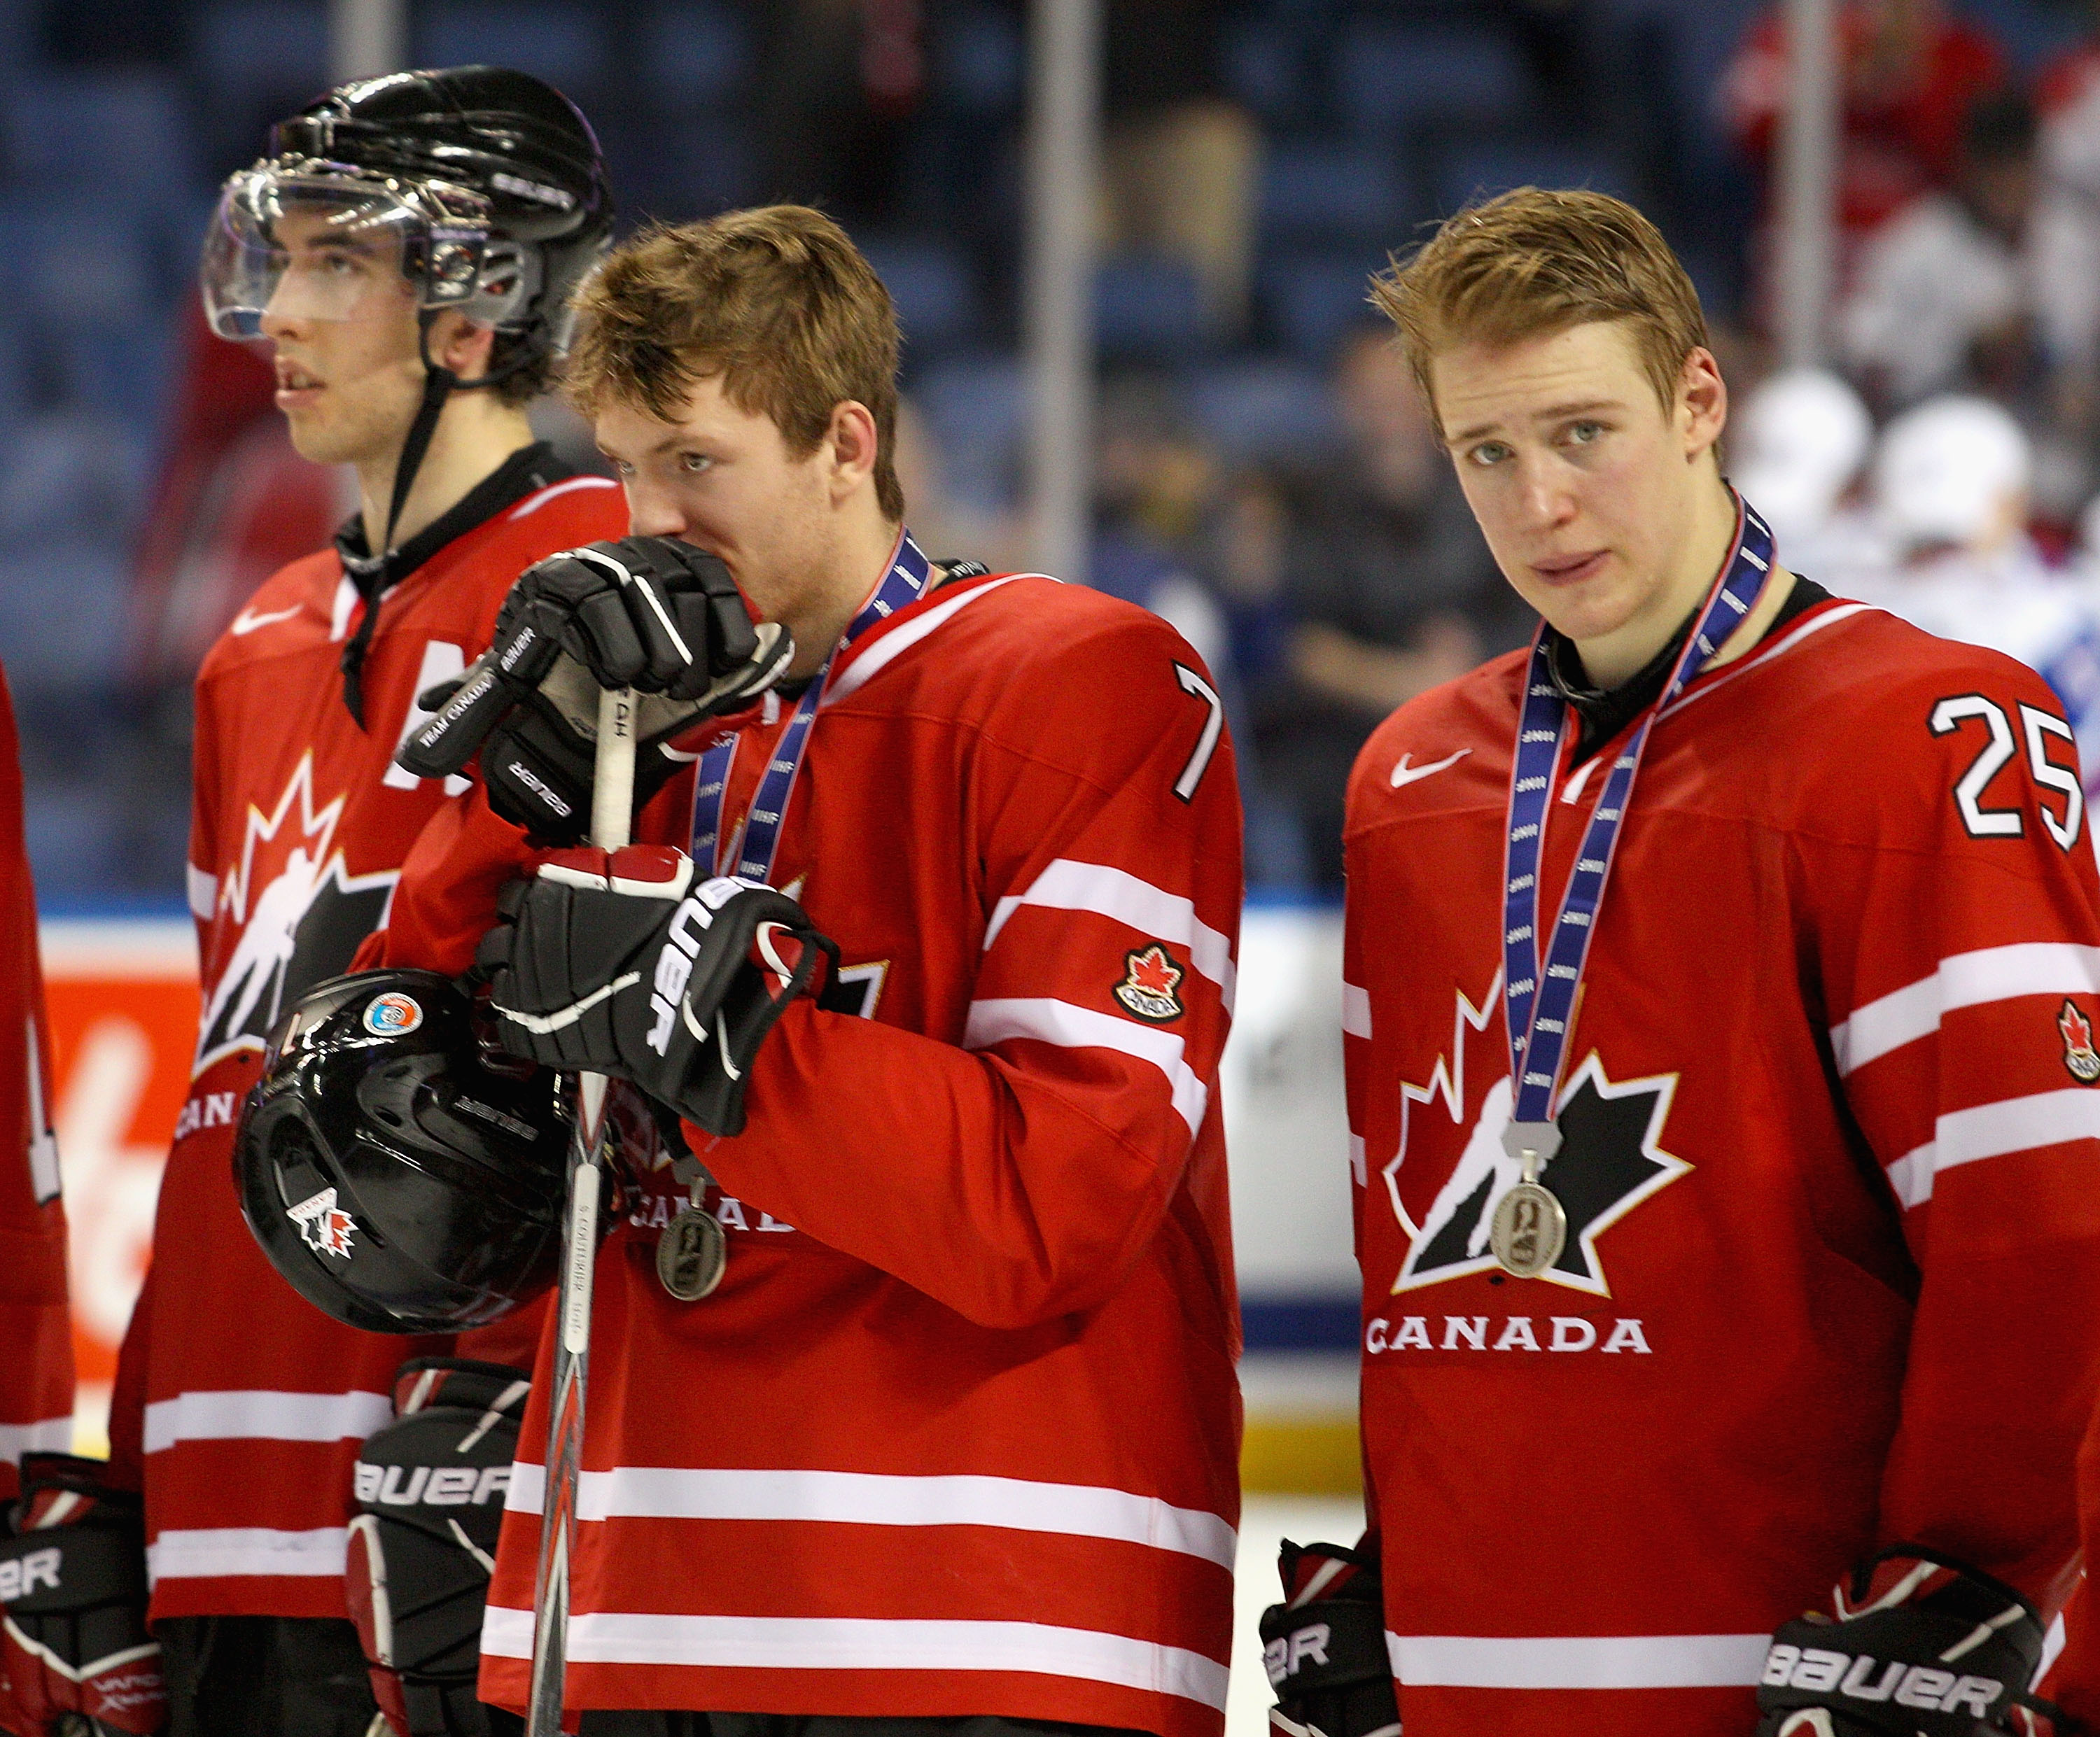 BUFFALO, NY - JANUARY 05: Jared Cowen #2, Sean Couturier #7 and Carter Ashton #25 of Canada stand on the ice during medal ceremonies after losing to Russia 5-3 during the 2011 IIHF World U20 Championship Gold medal game between Canada and Russia at the HS